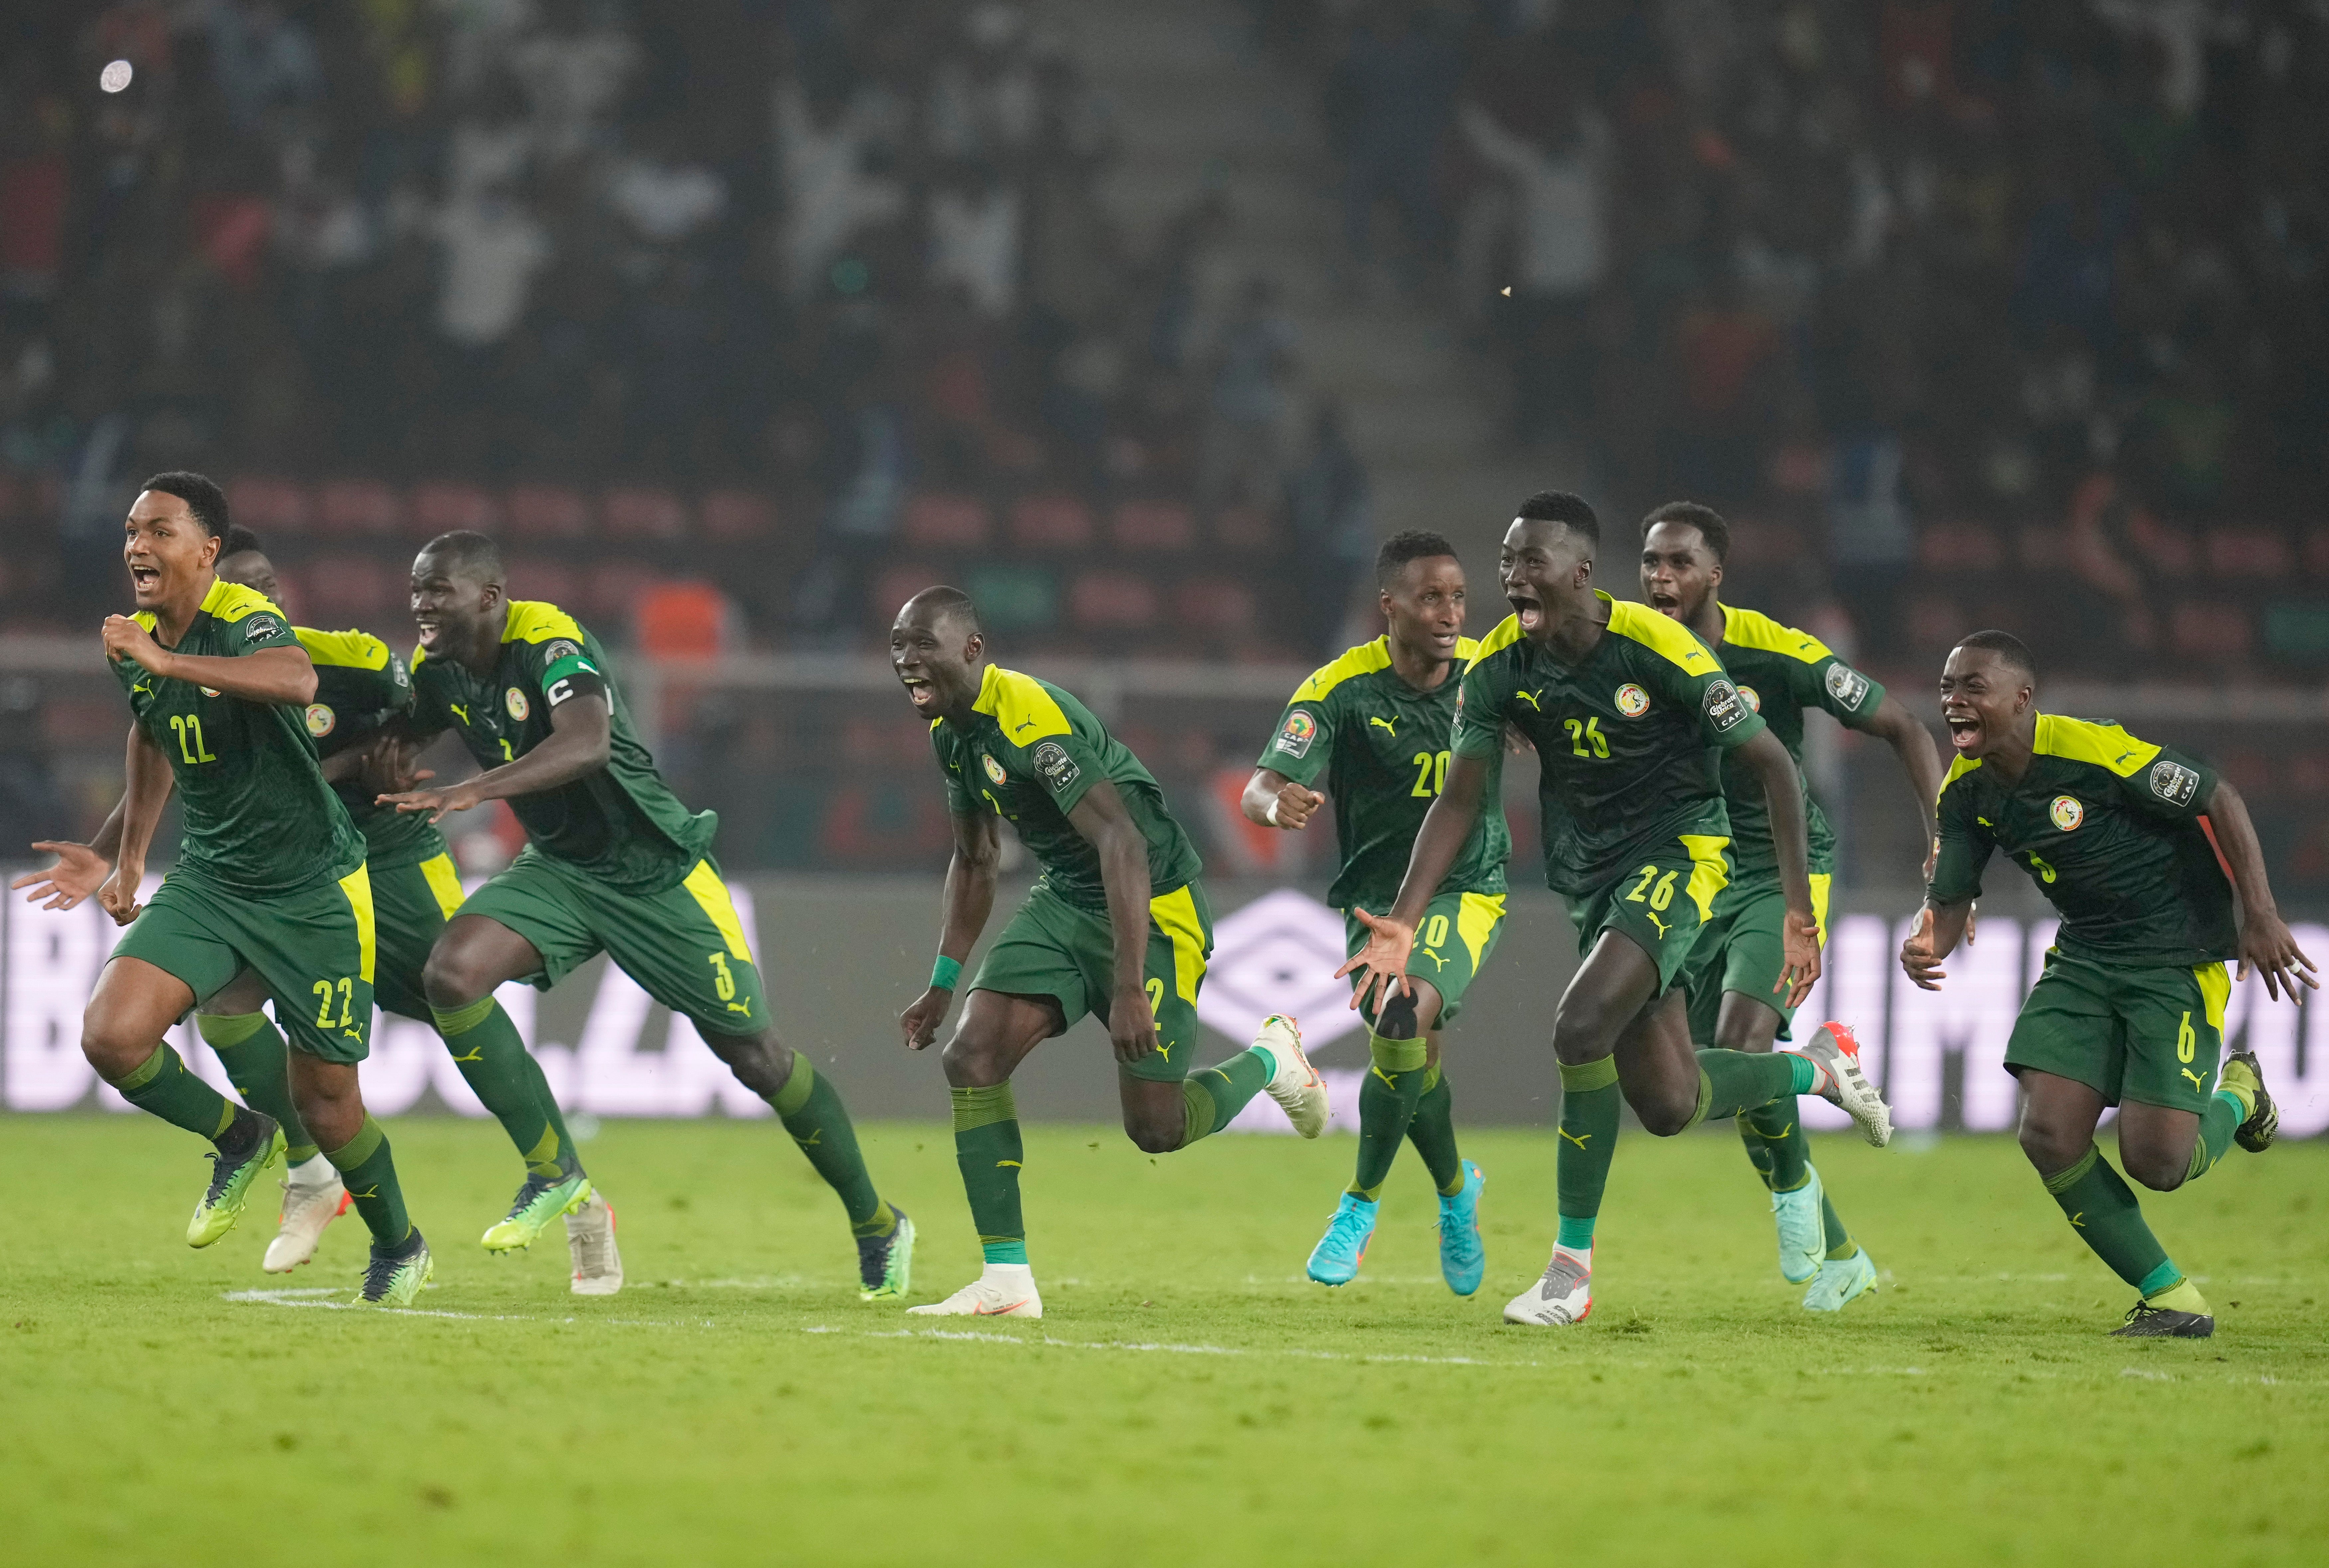 Senegal won the trophy after a dramatic penalty shootout